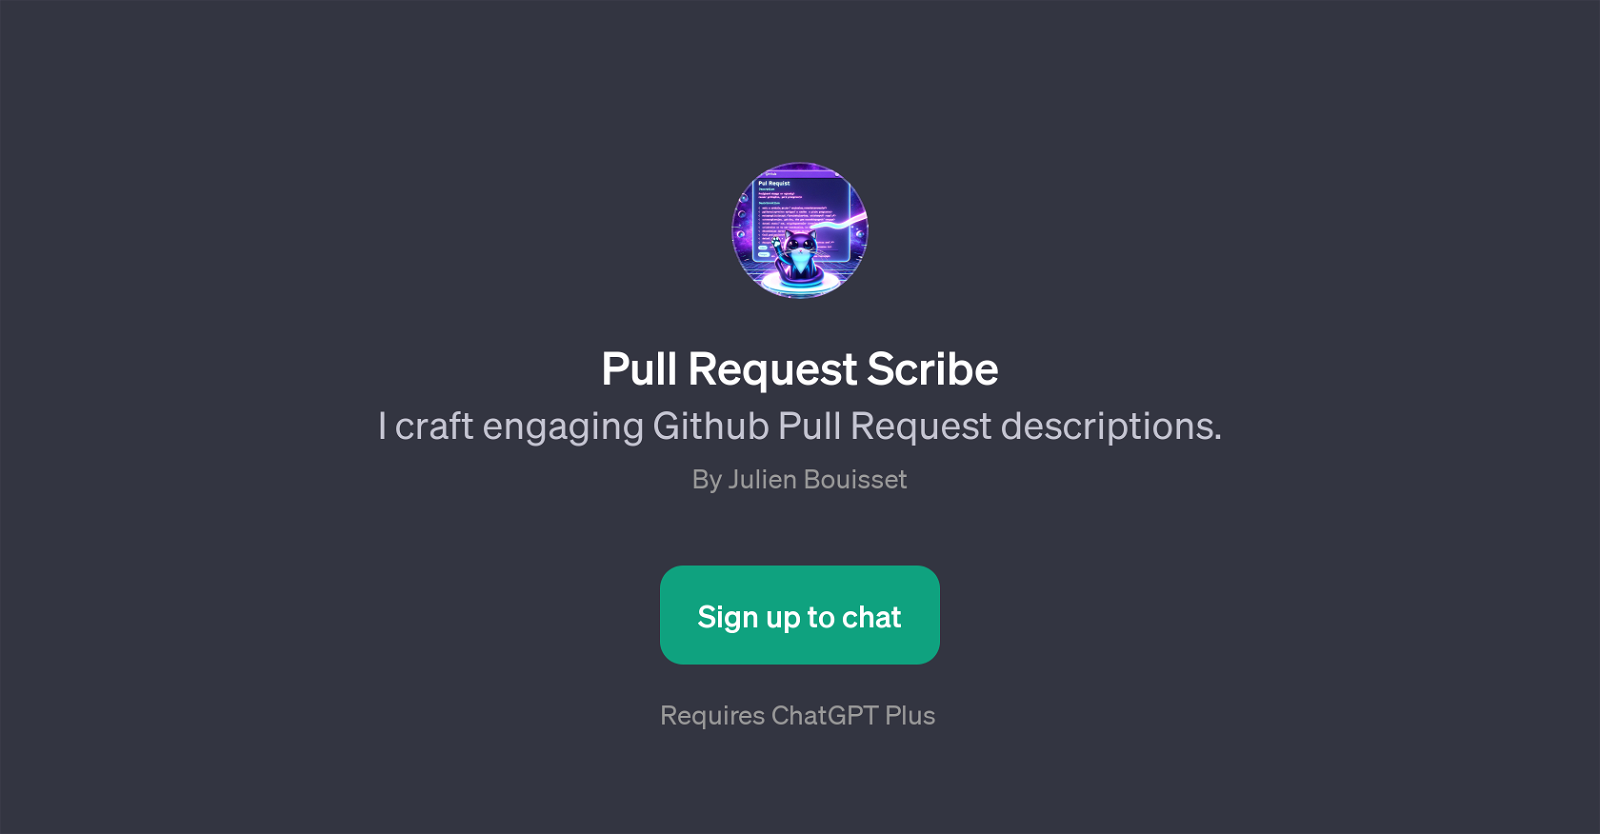 Pull Request Scribe website